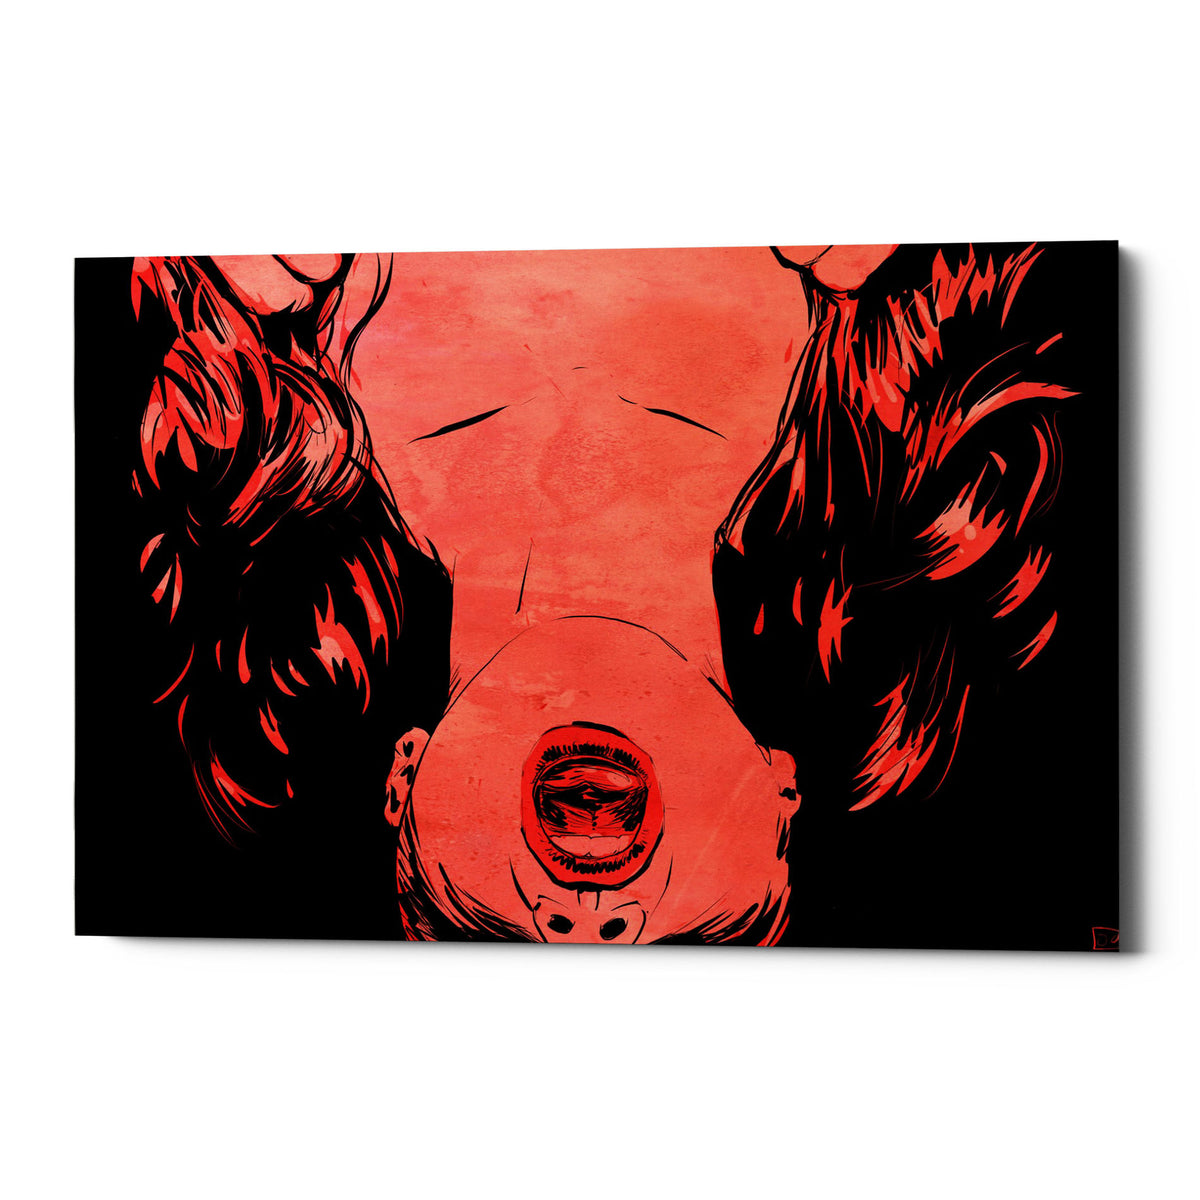 Epic Graffiti &quot;O&quot; by Giuseppe Cristiano, Giclee Canvas Wall Art, 12&quot;x16&quot;